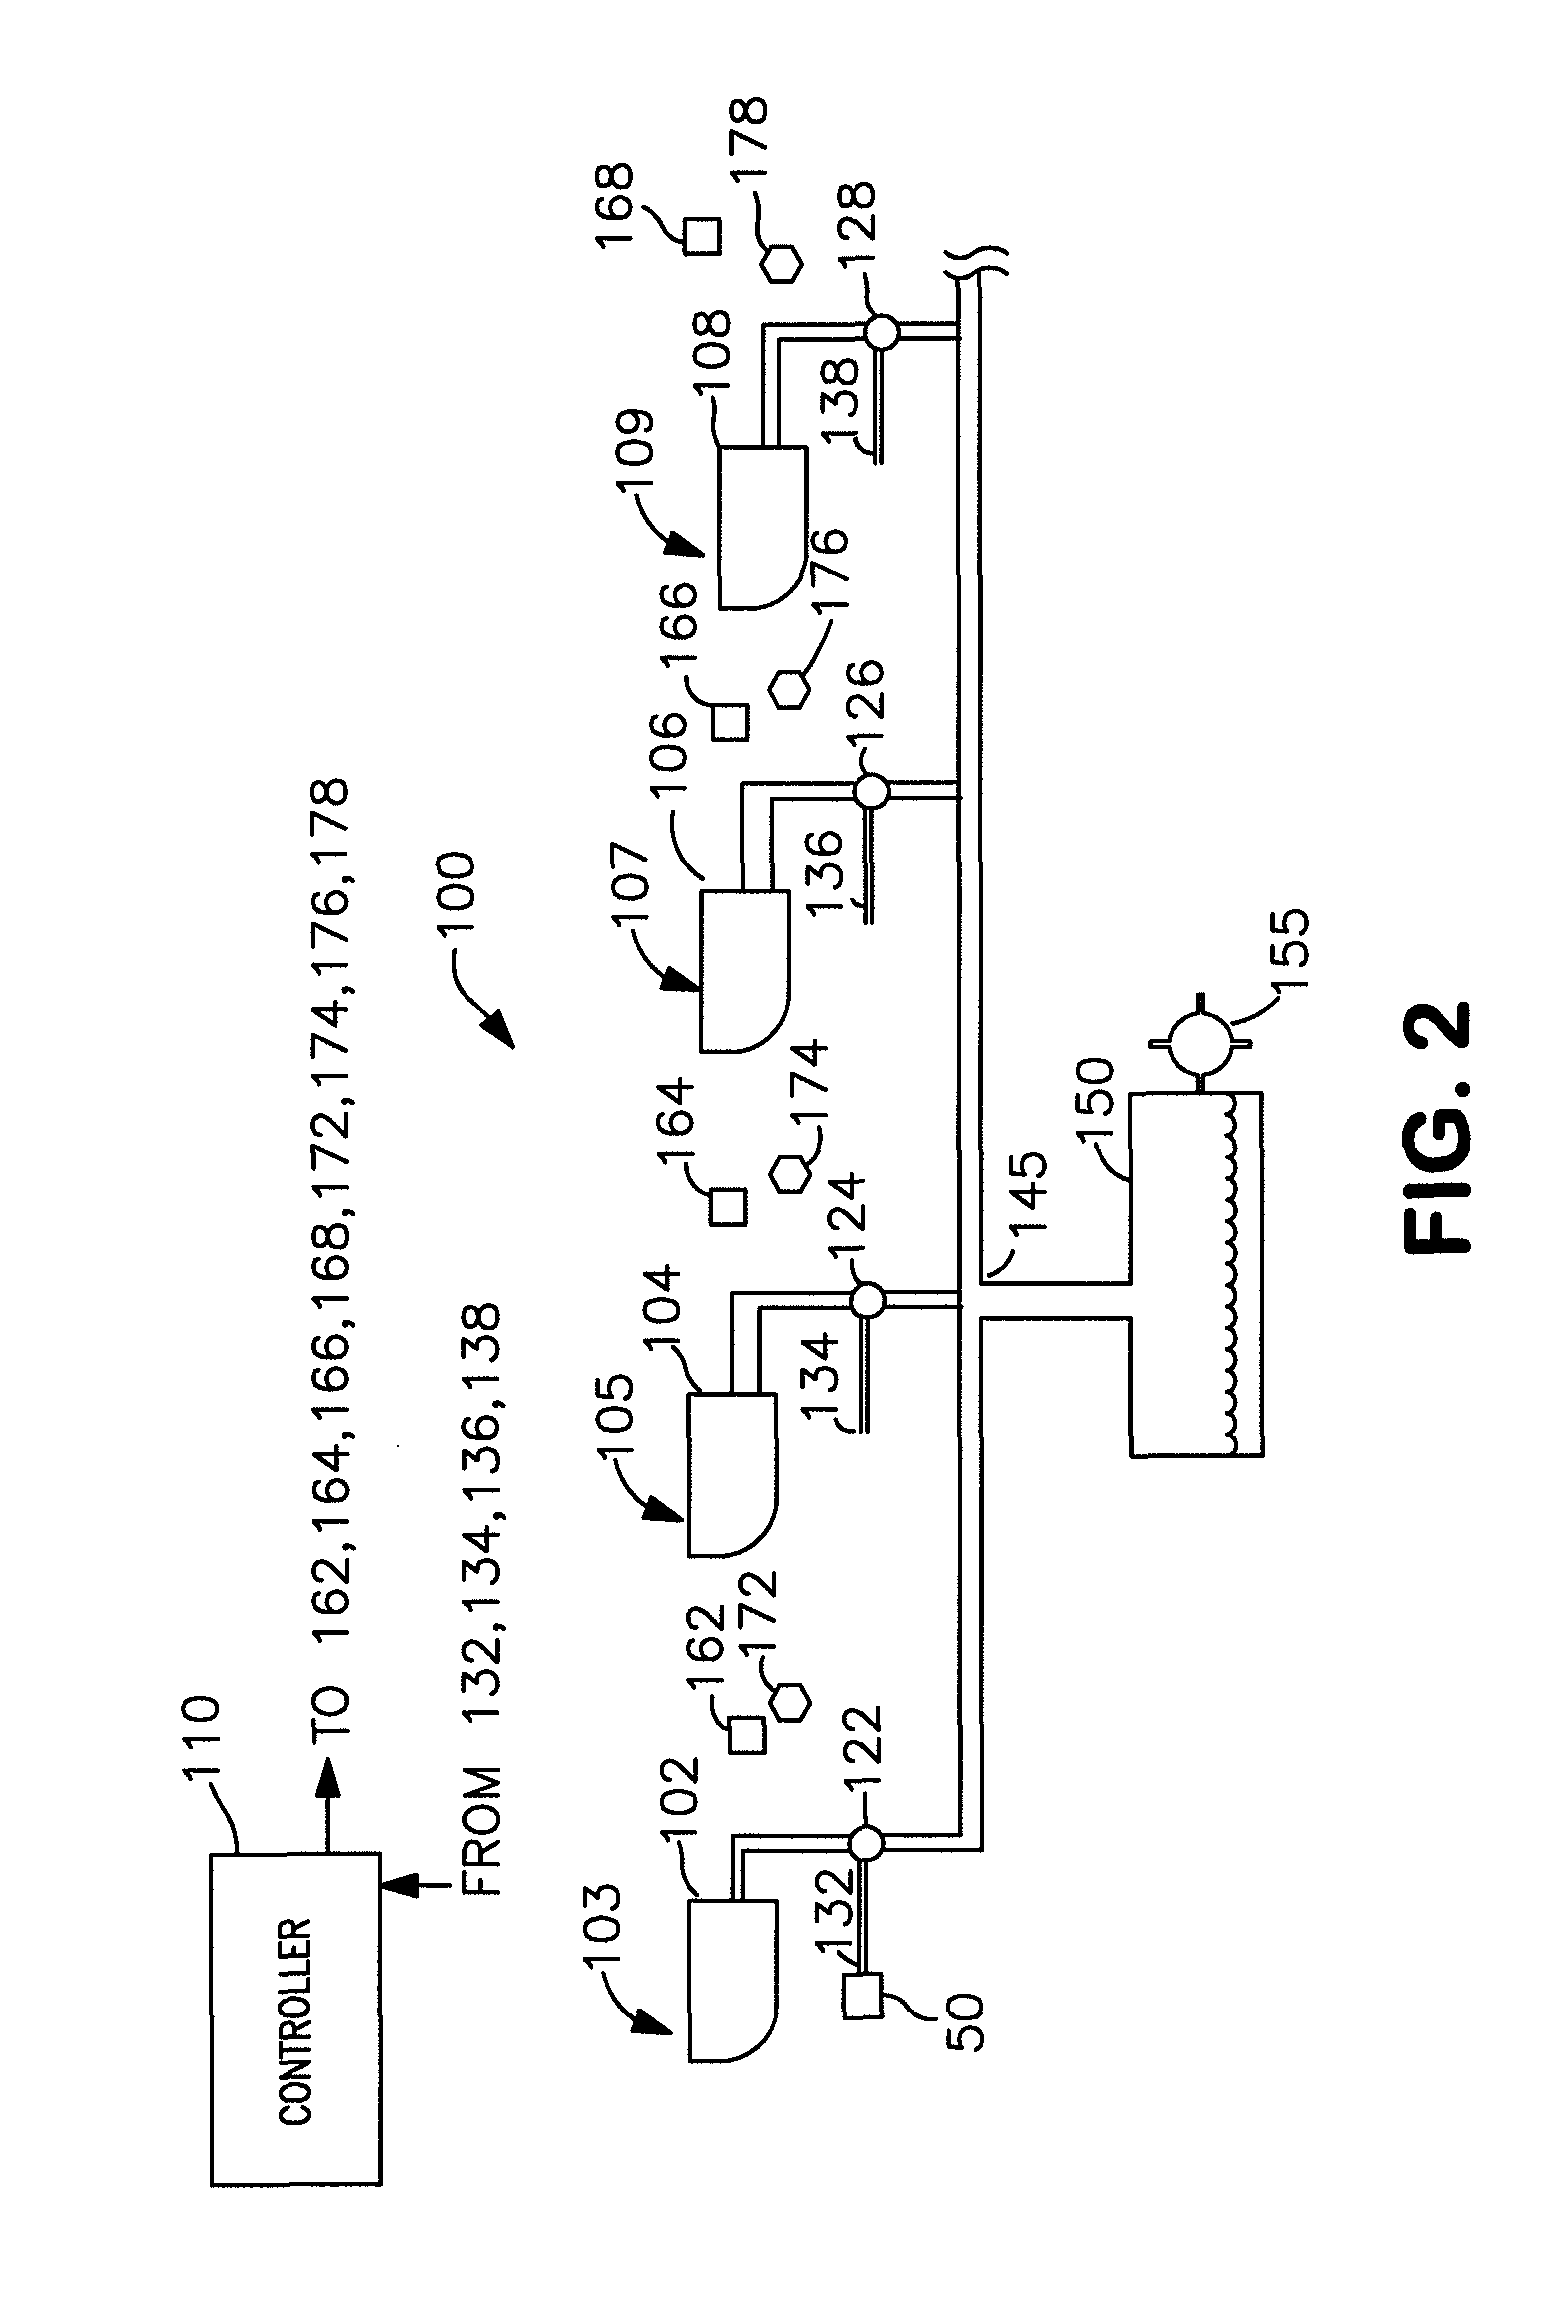 Cooking medium systems having a single mechanical lever and control assisted filtering and draining